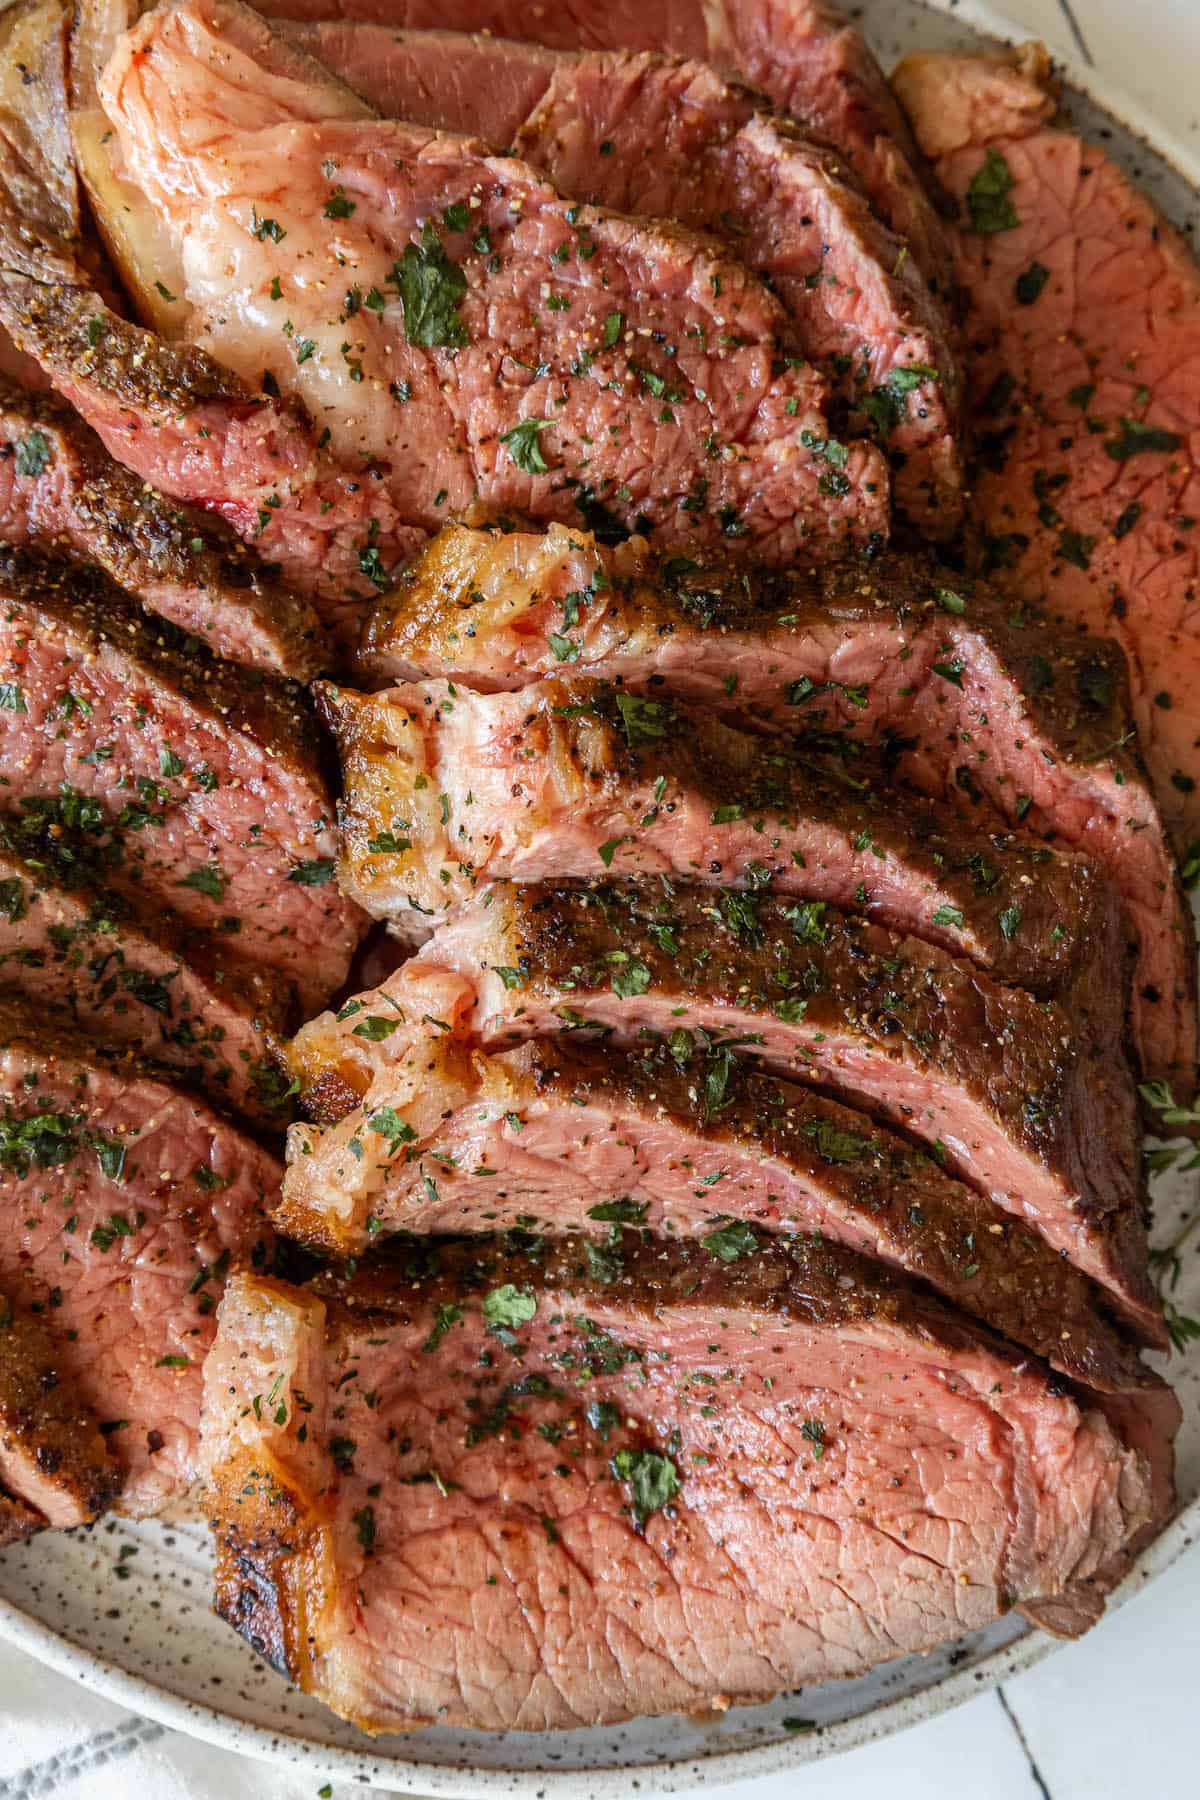 Steak on a plate with herb butter.